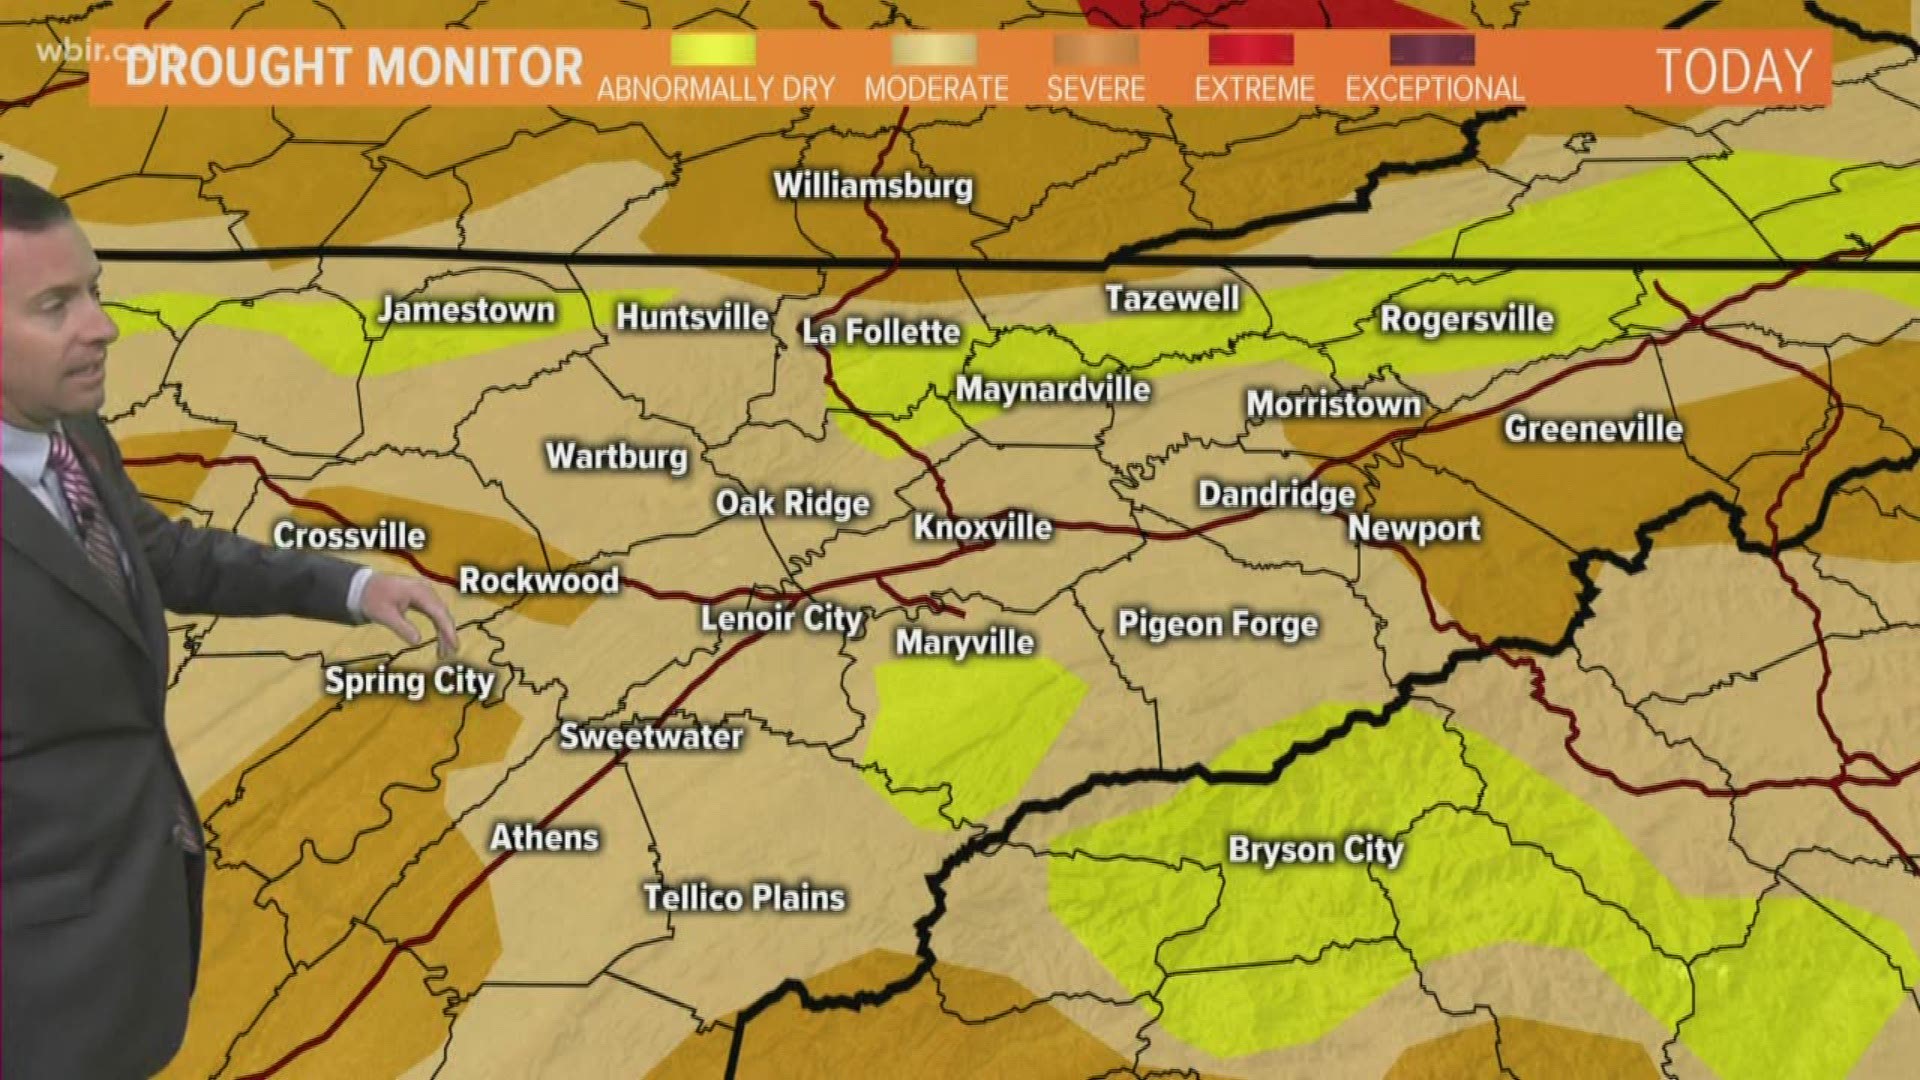 The latest drought monitor just came out with severe drought spreading for many.